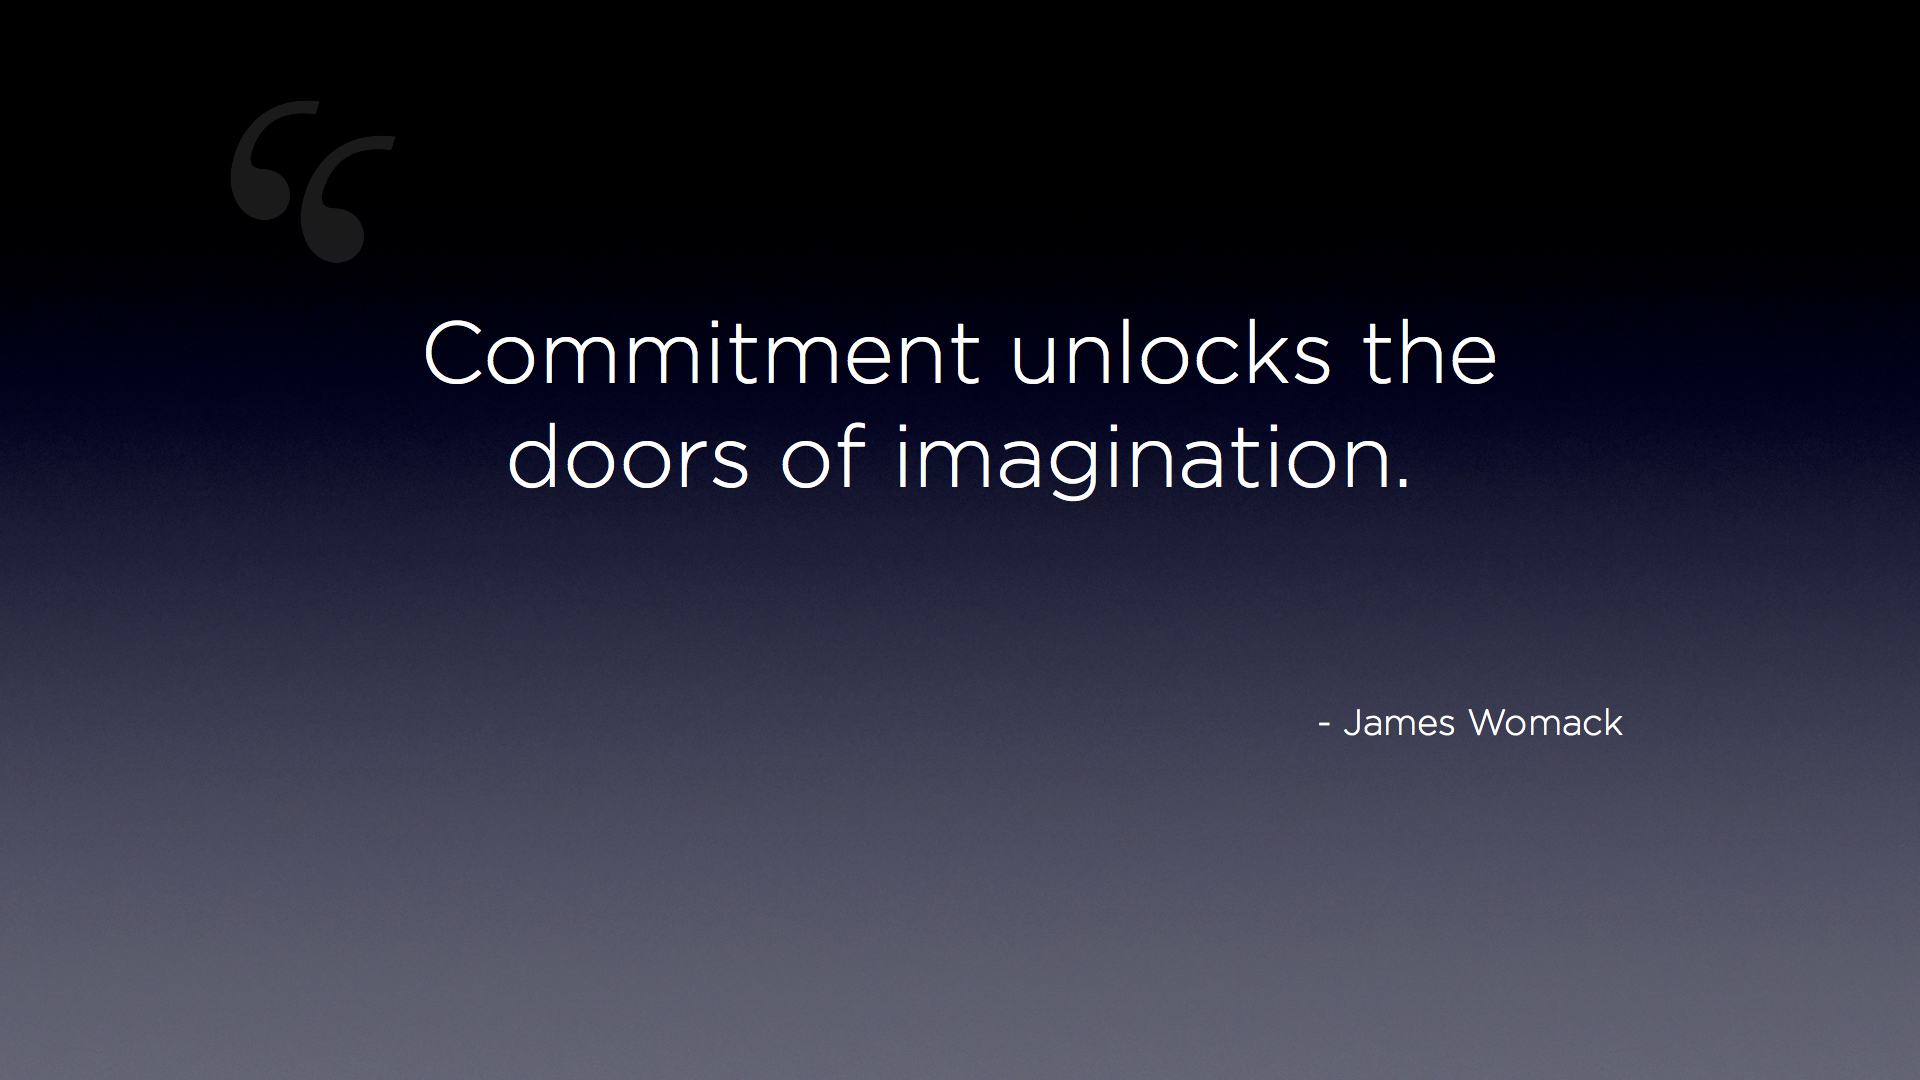 "Commitment unlocks the doors of imagination." - James Womack quote